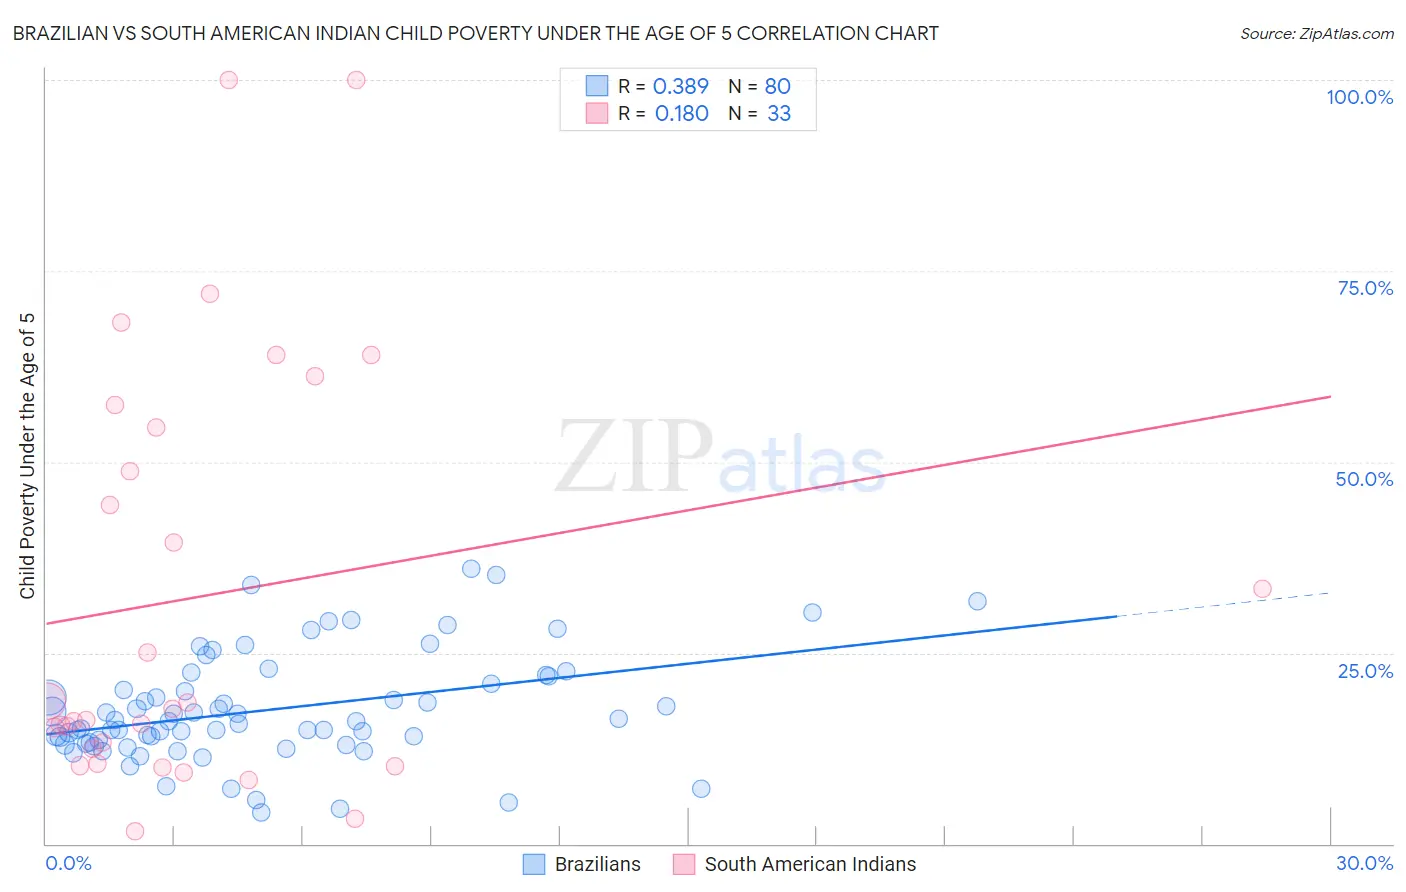 Brazilian vs South American Indian Child Poverty Under the Age of 5